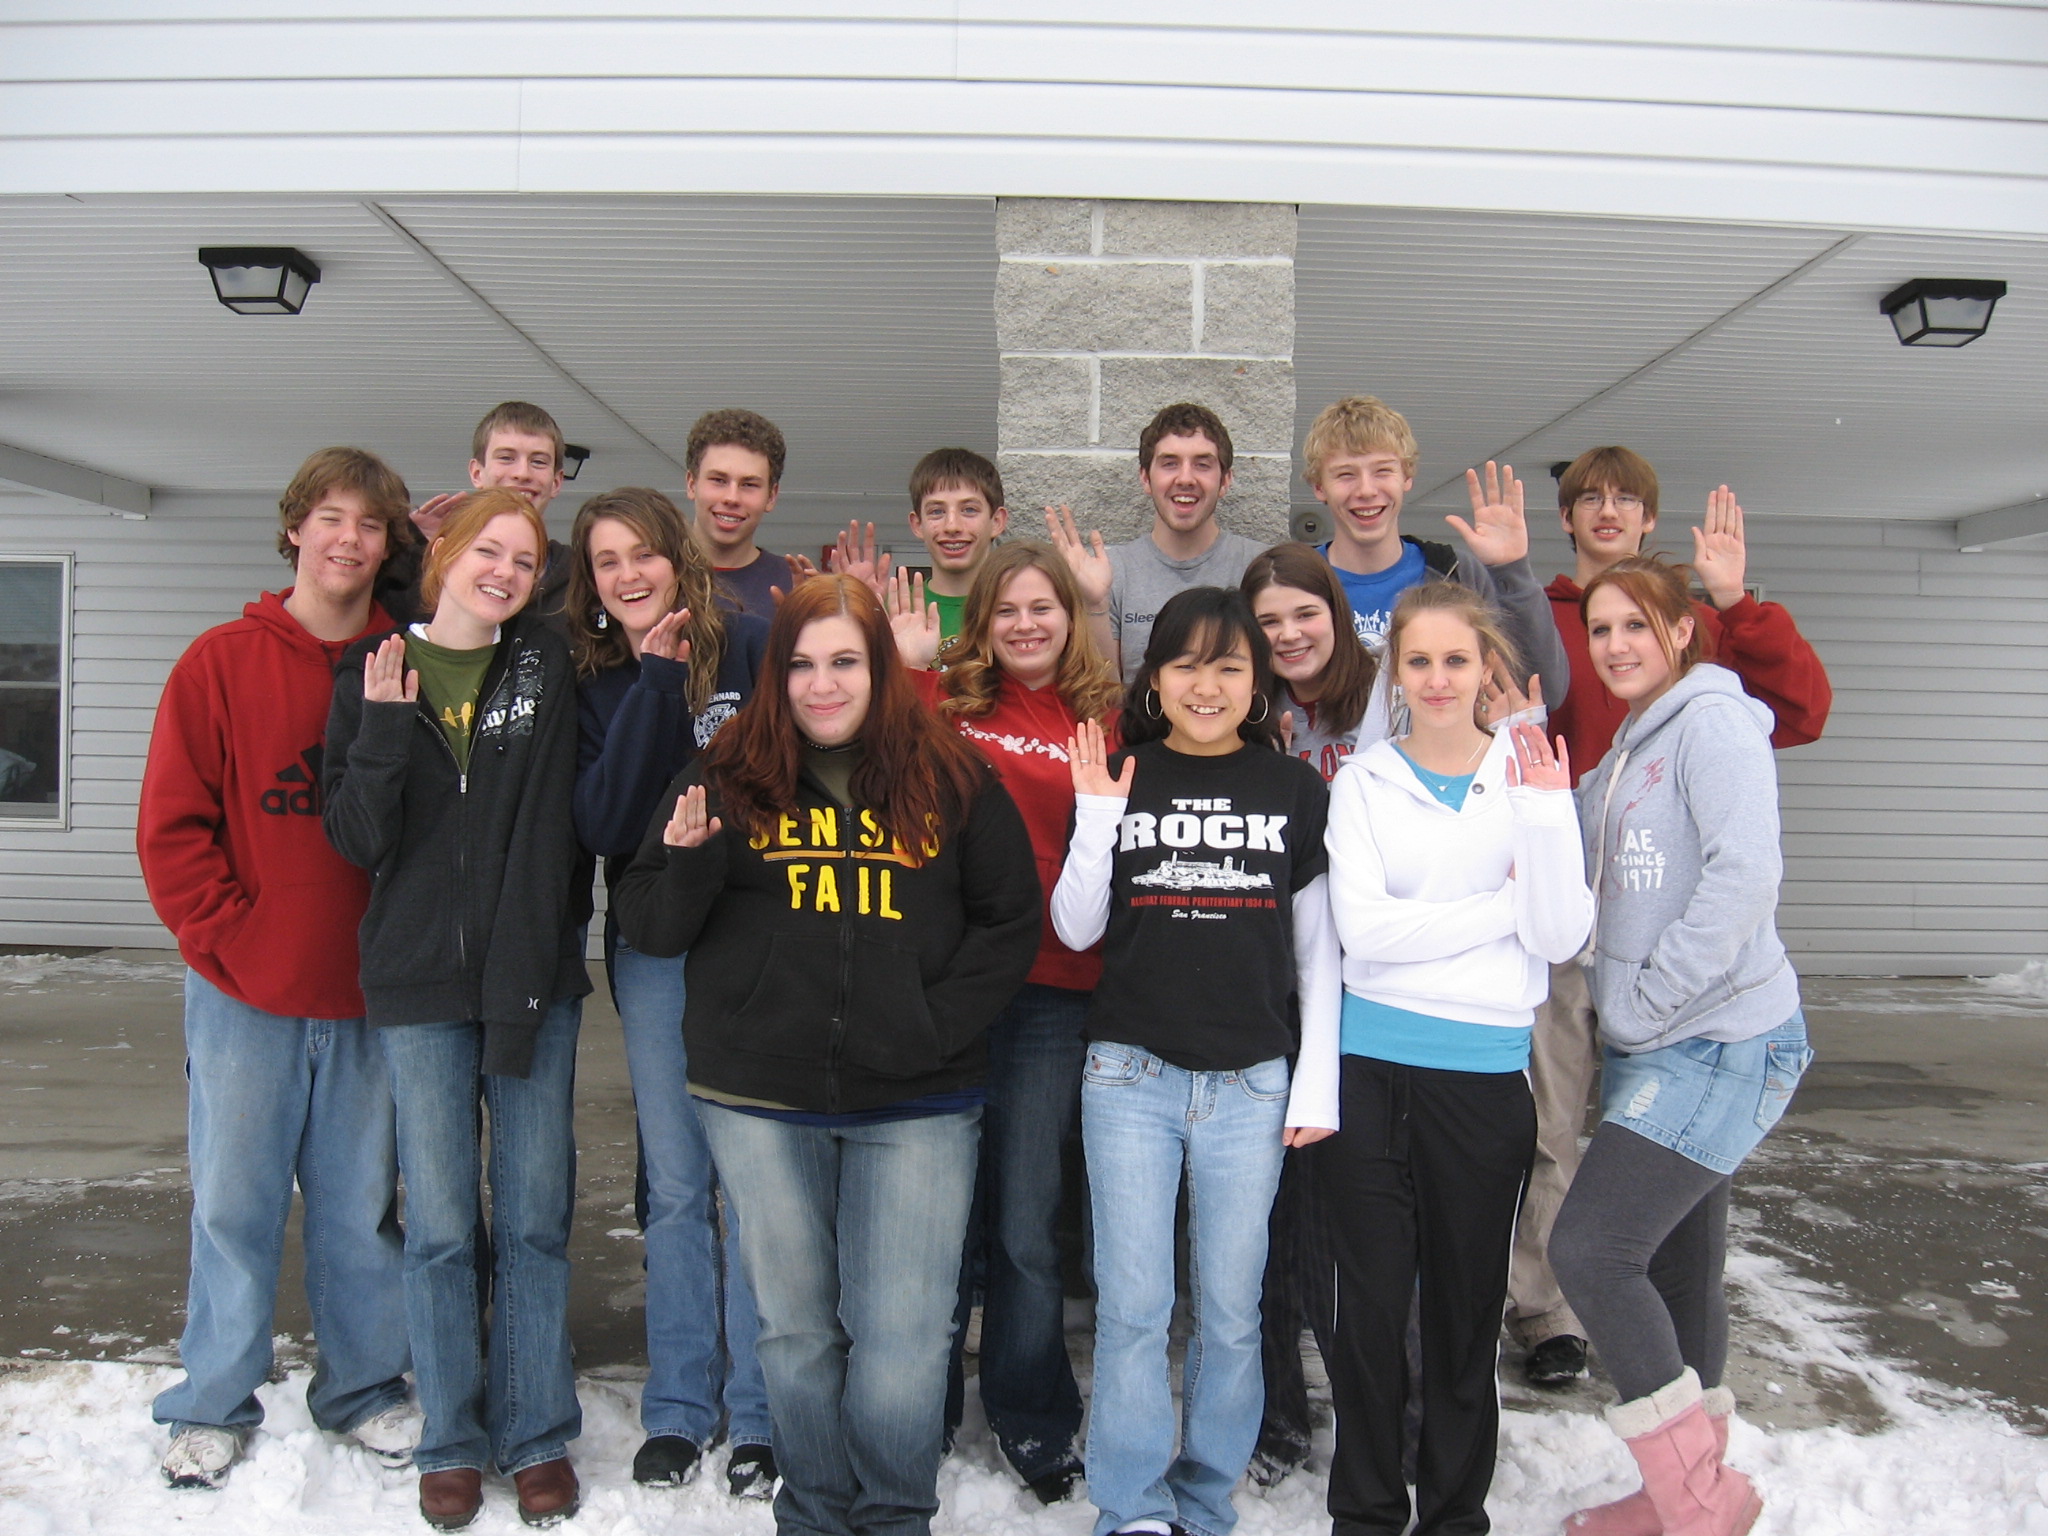 Students on the 2007 Mission Team